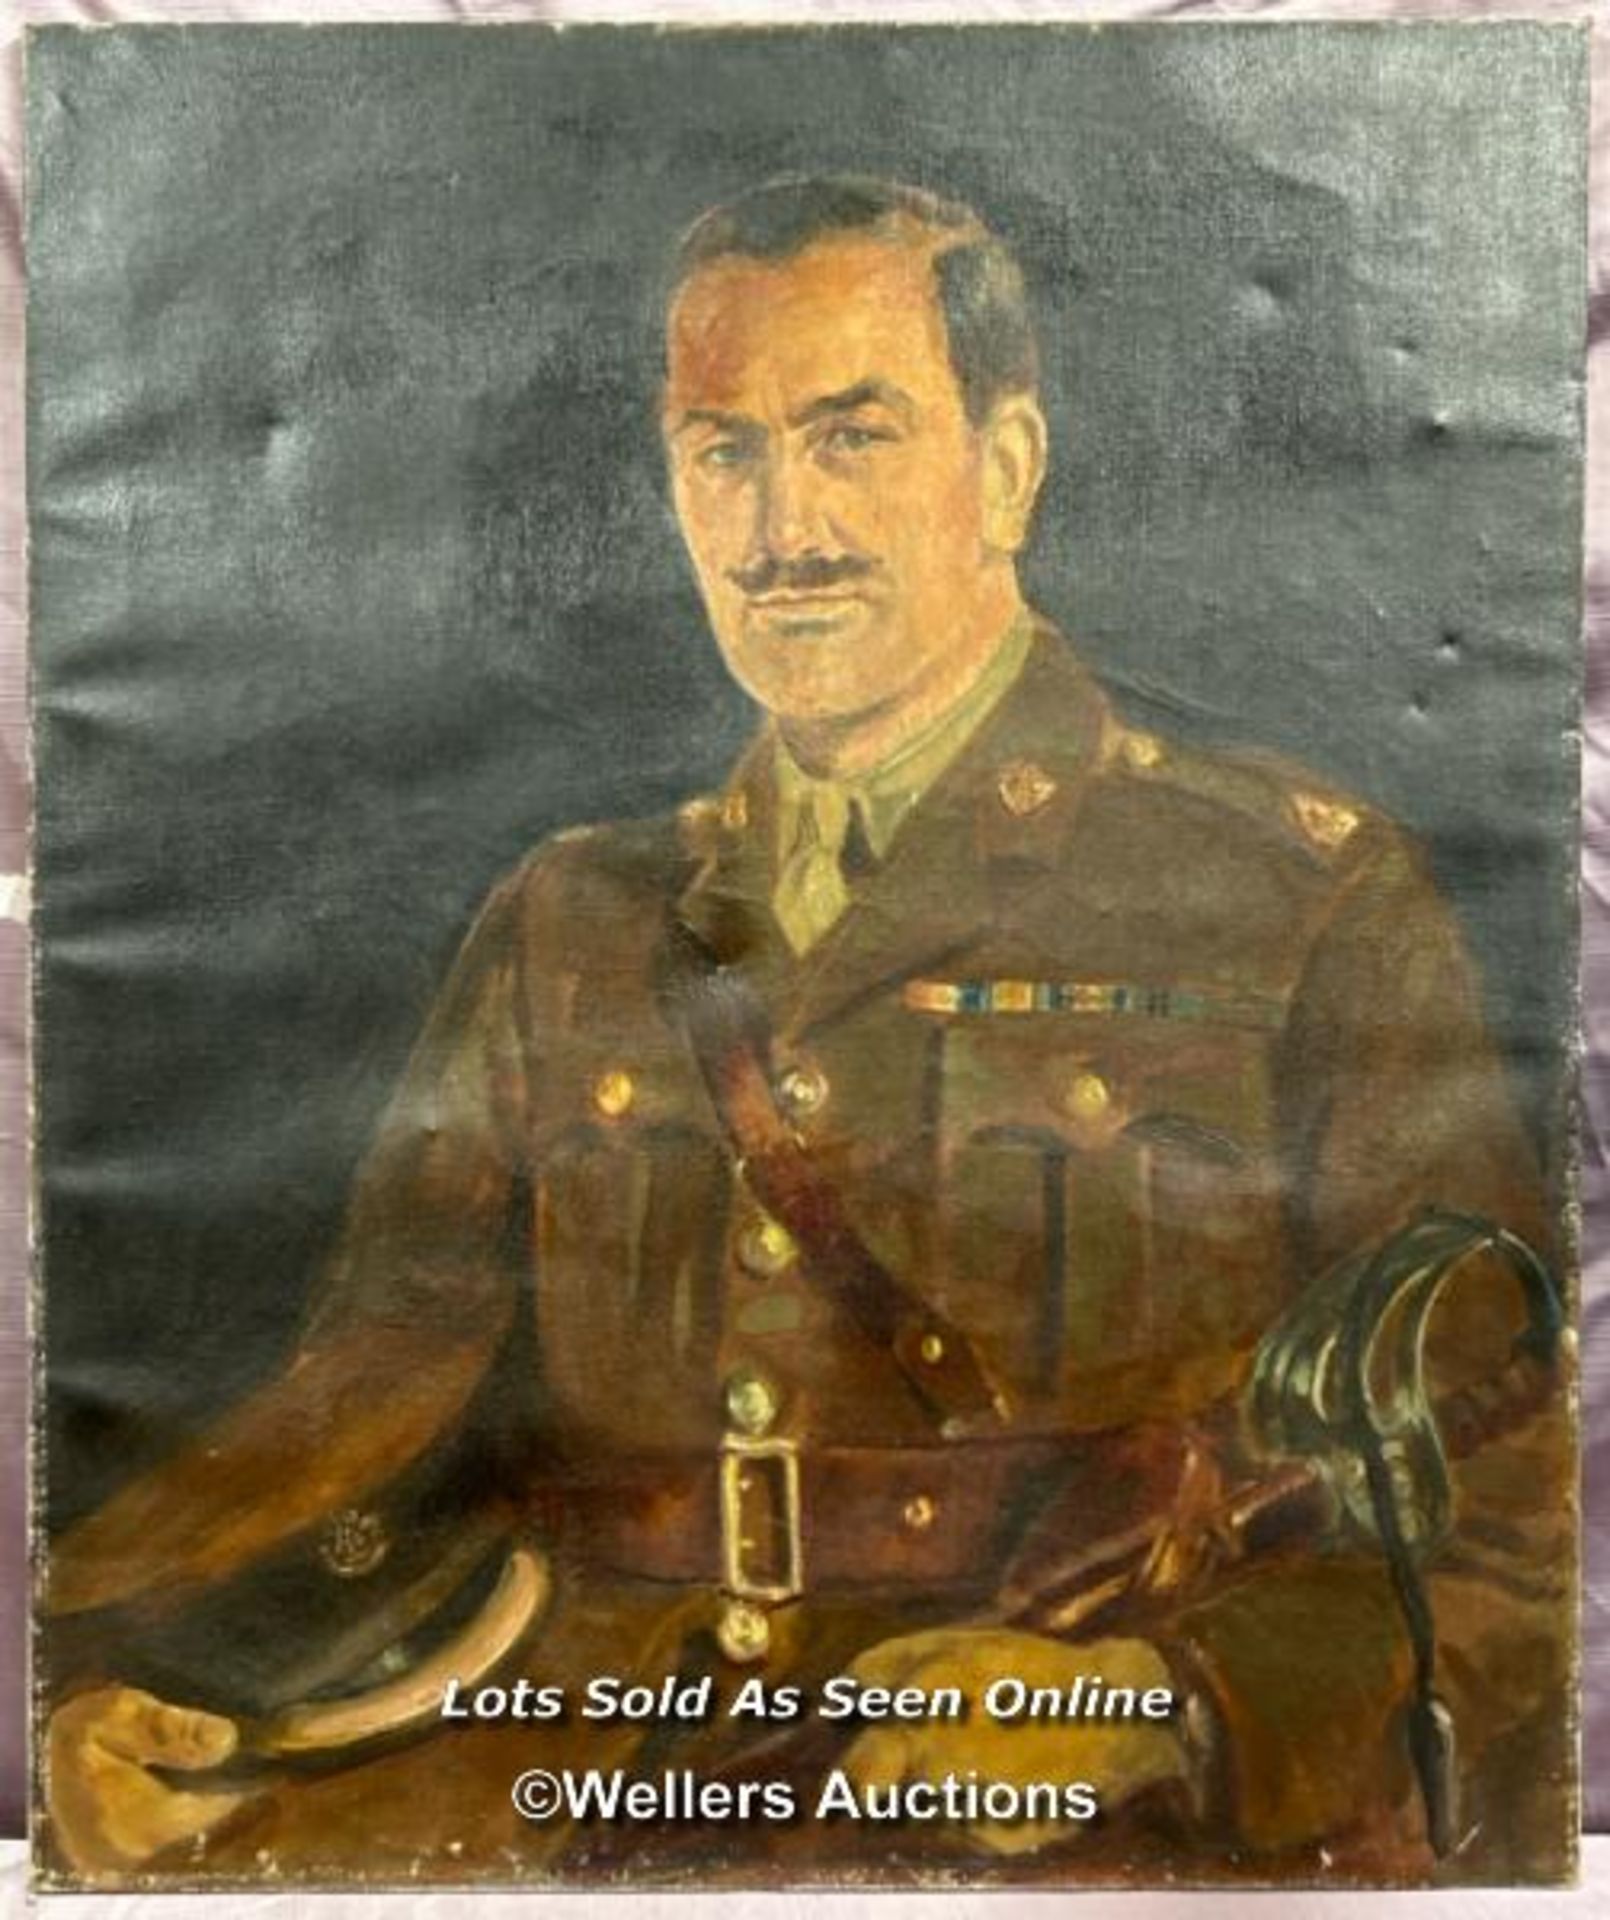 OIL ON CANVAS PORTRAIT OF A MAJOR FROM THE KINGS SOMERSET LIGHT INFANTRY, 76 X 63.5CM